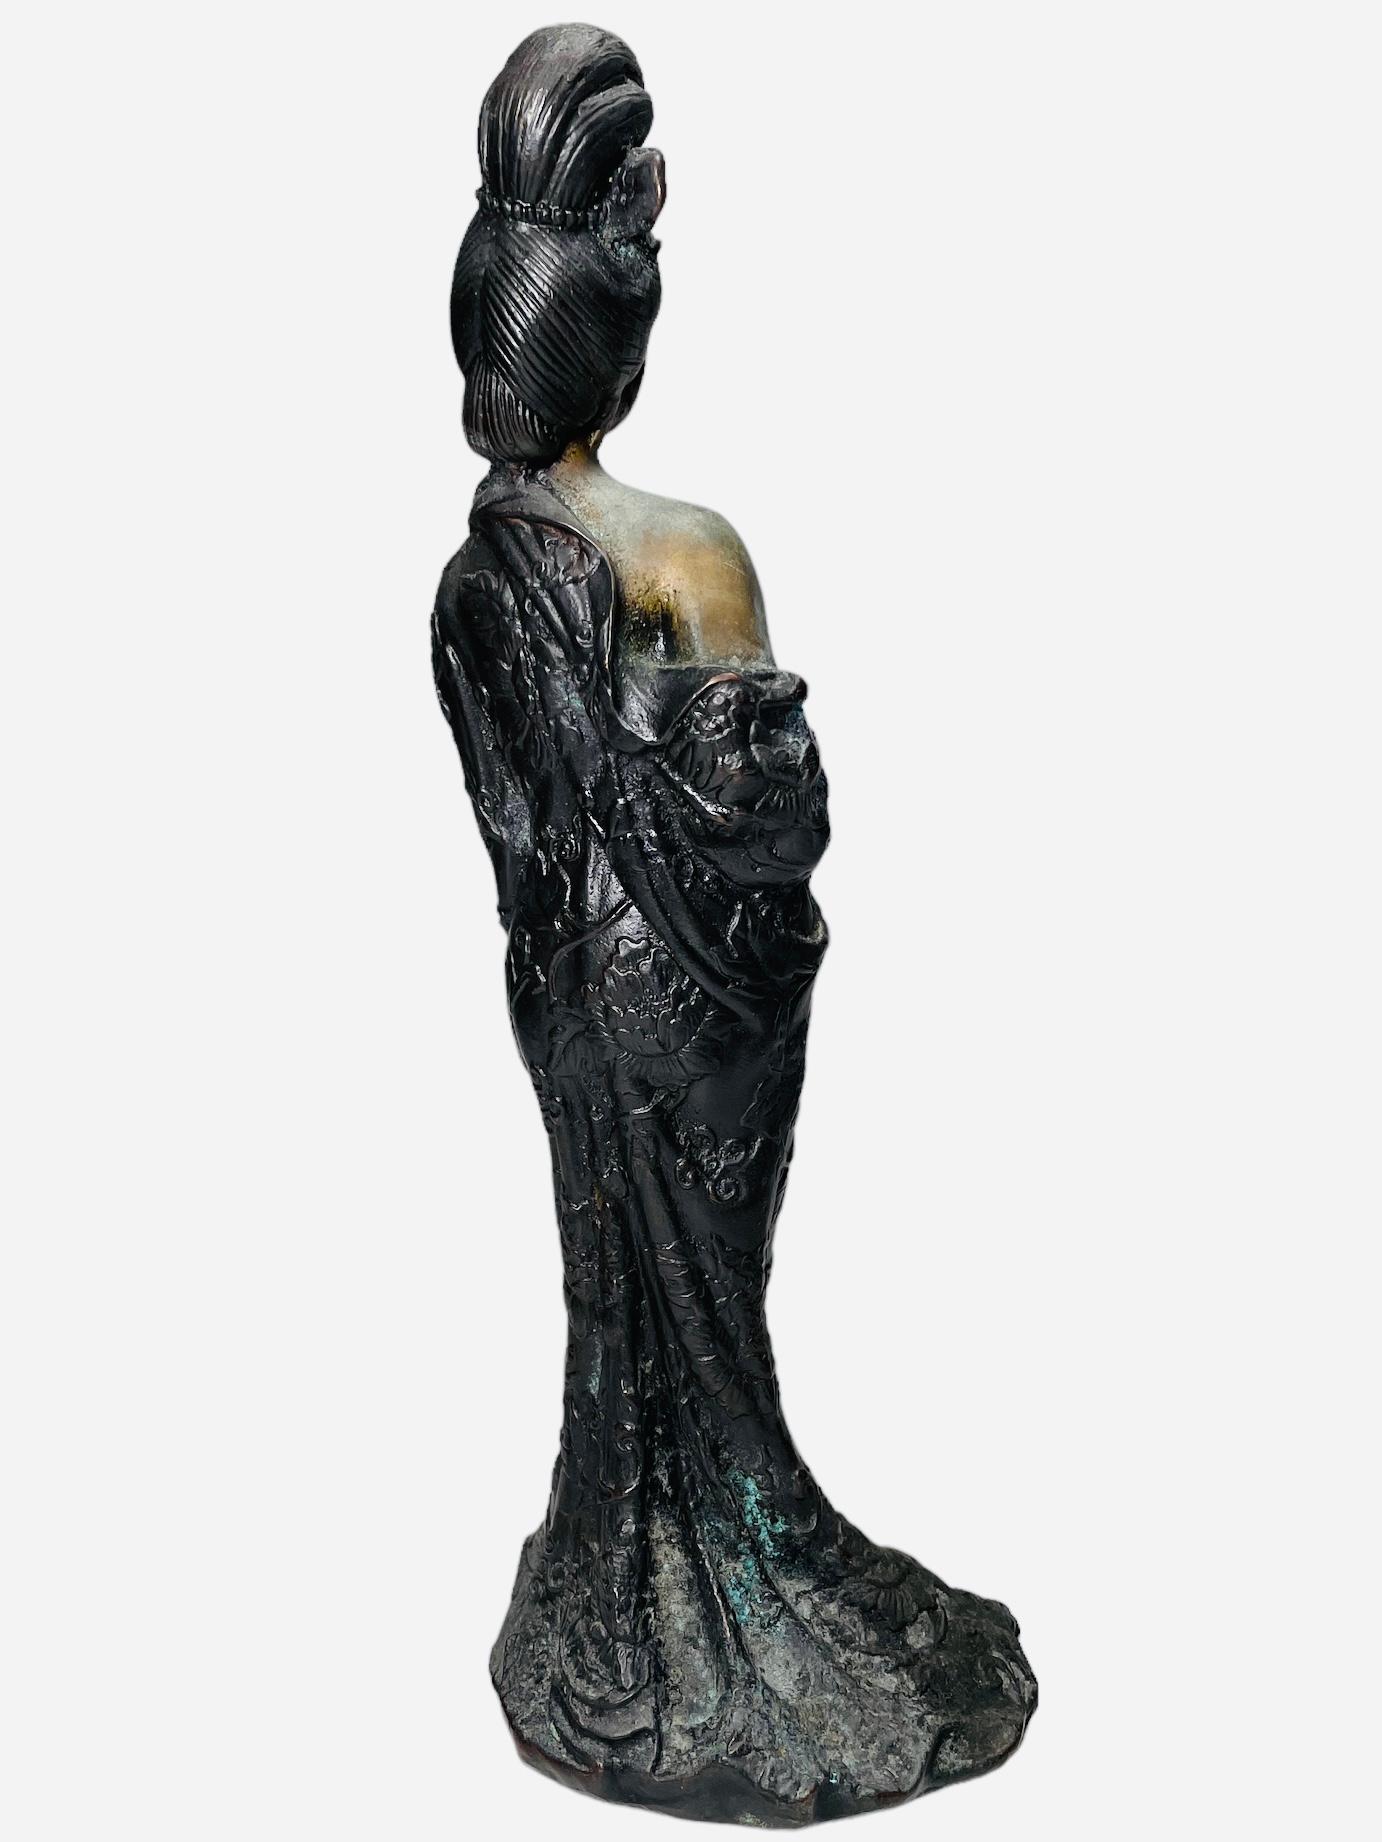 Repoussé Chinese Bronze Sculpture Of A Lady For Sale